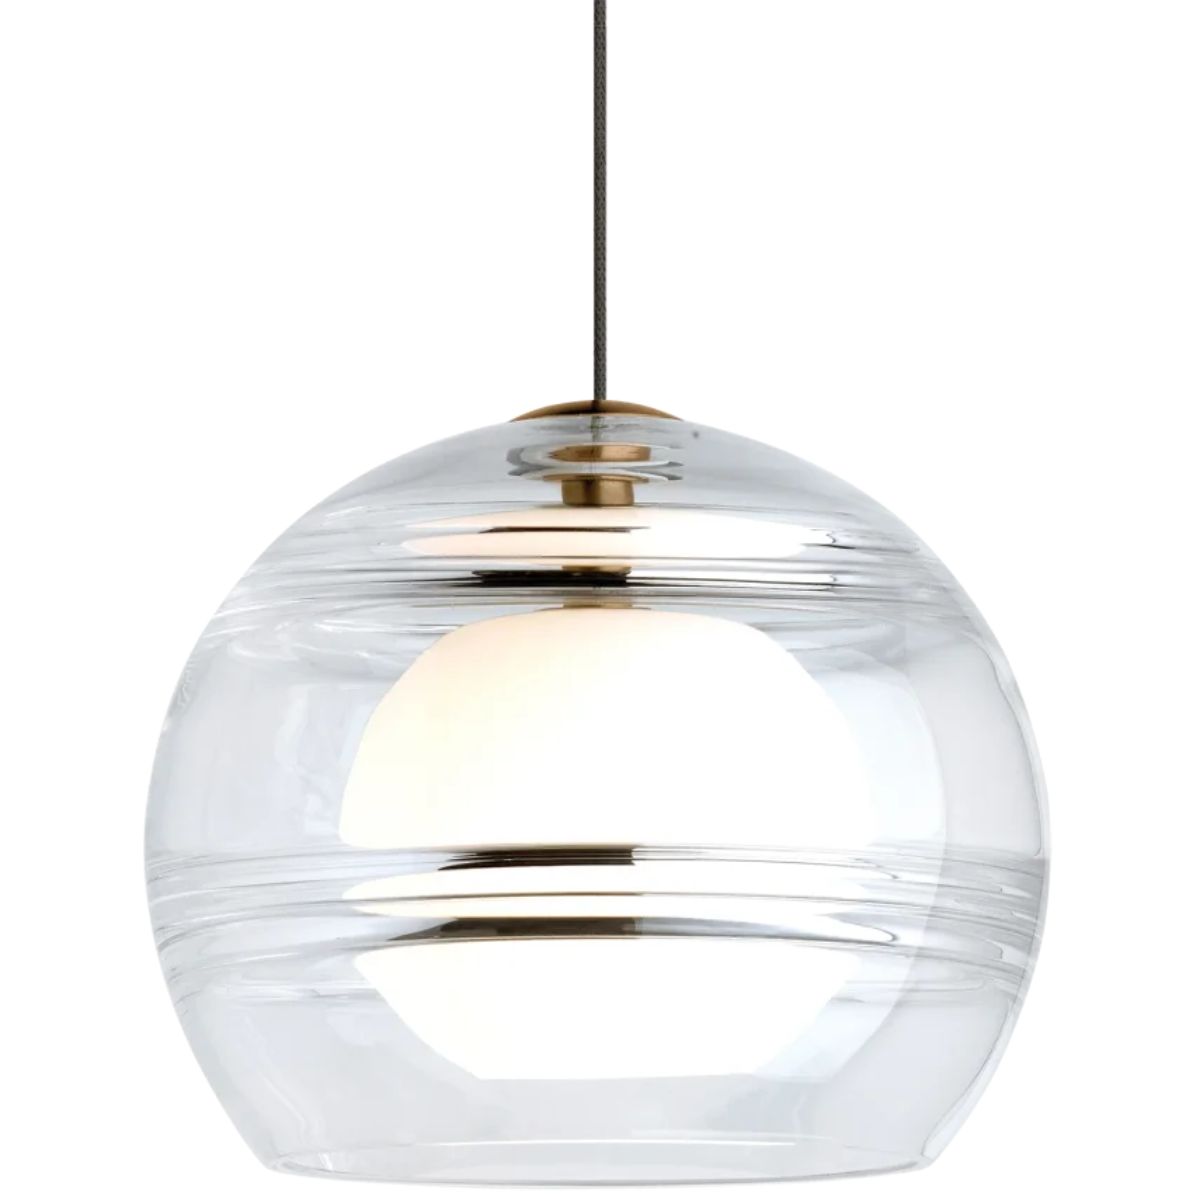 Sedona 6 in. Monopoint Halogen Pendant Light 420 lumens Brass finish with Clear glass